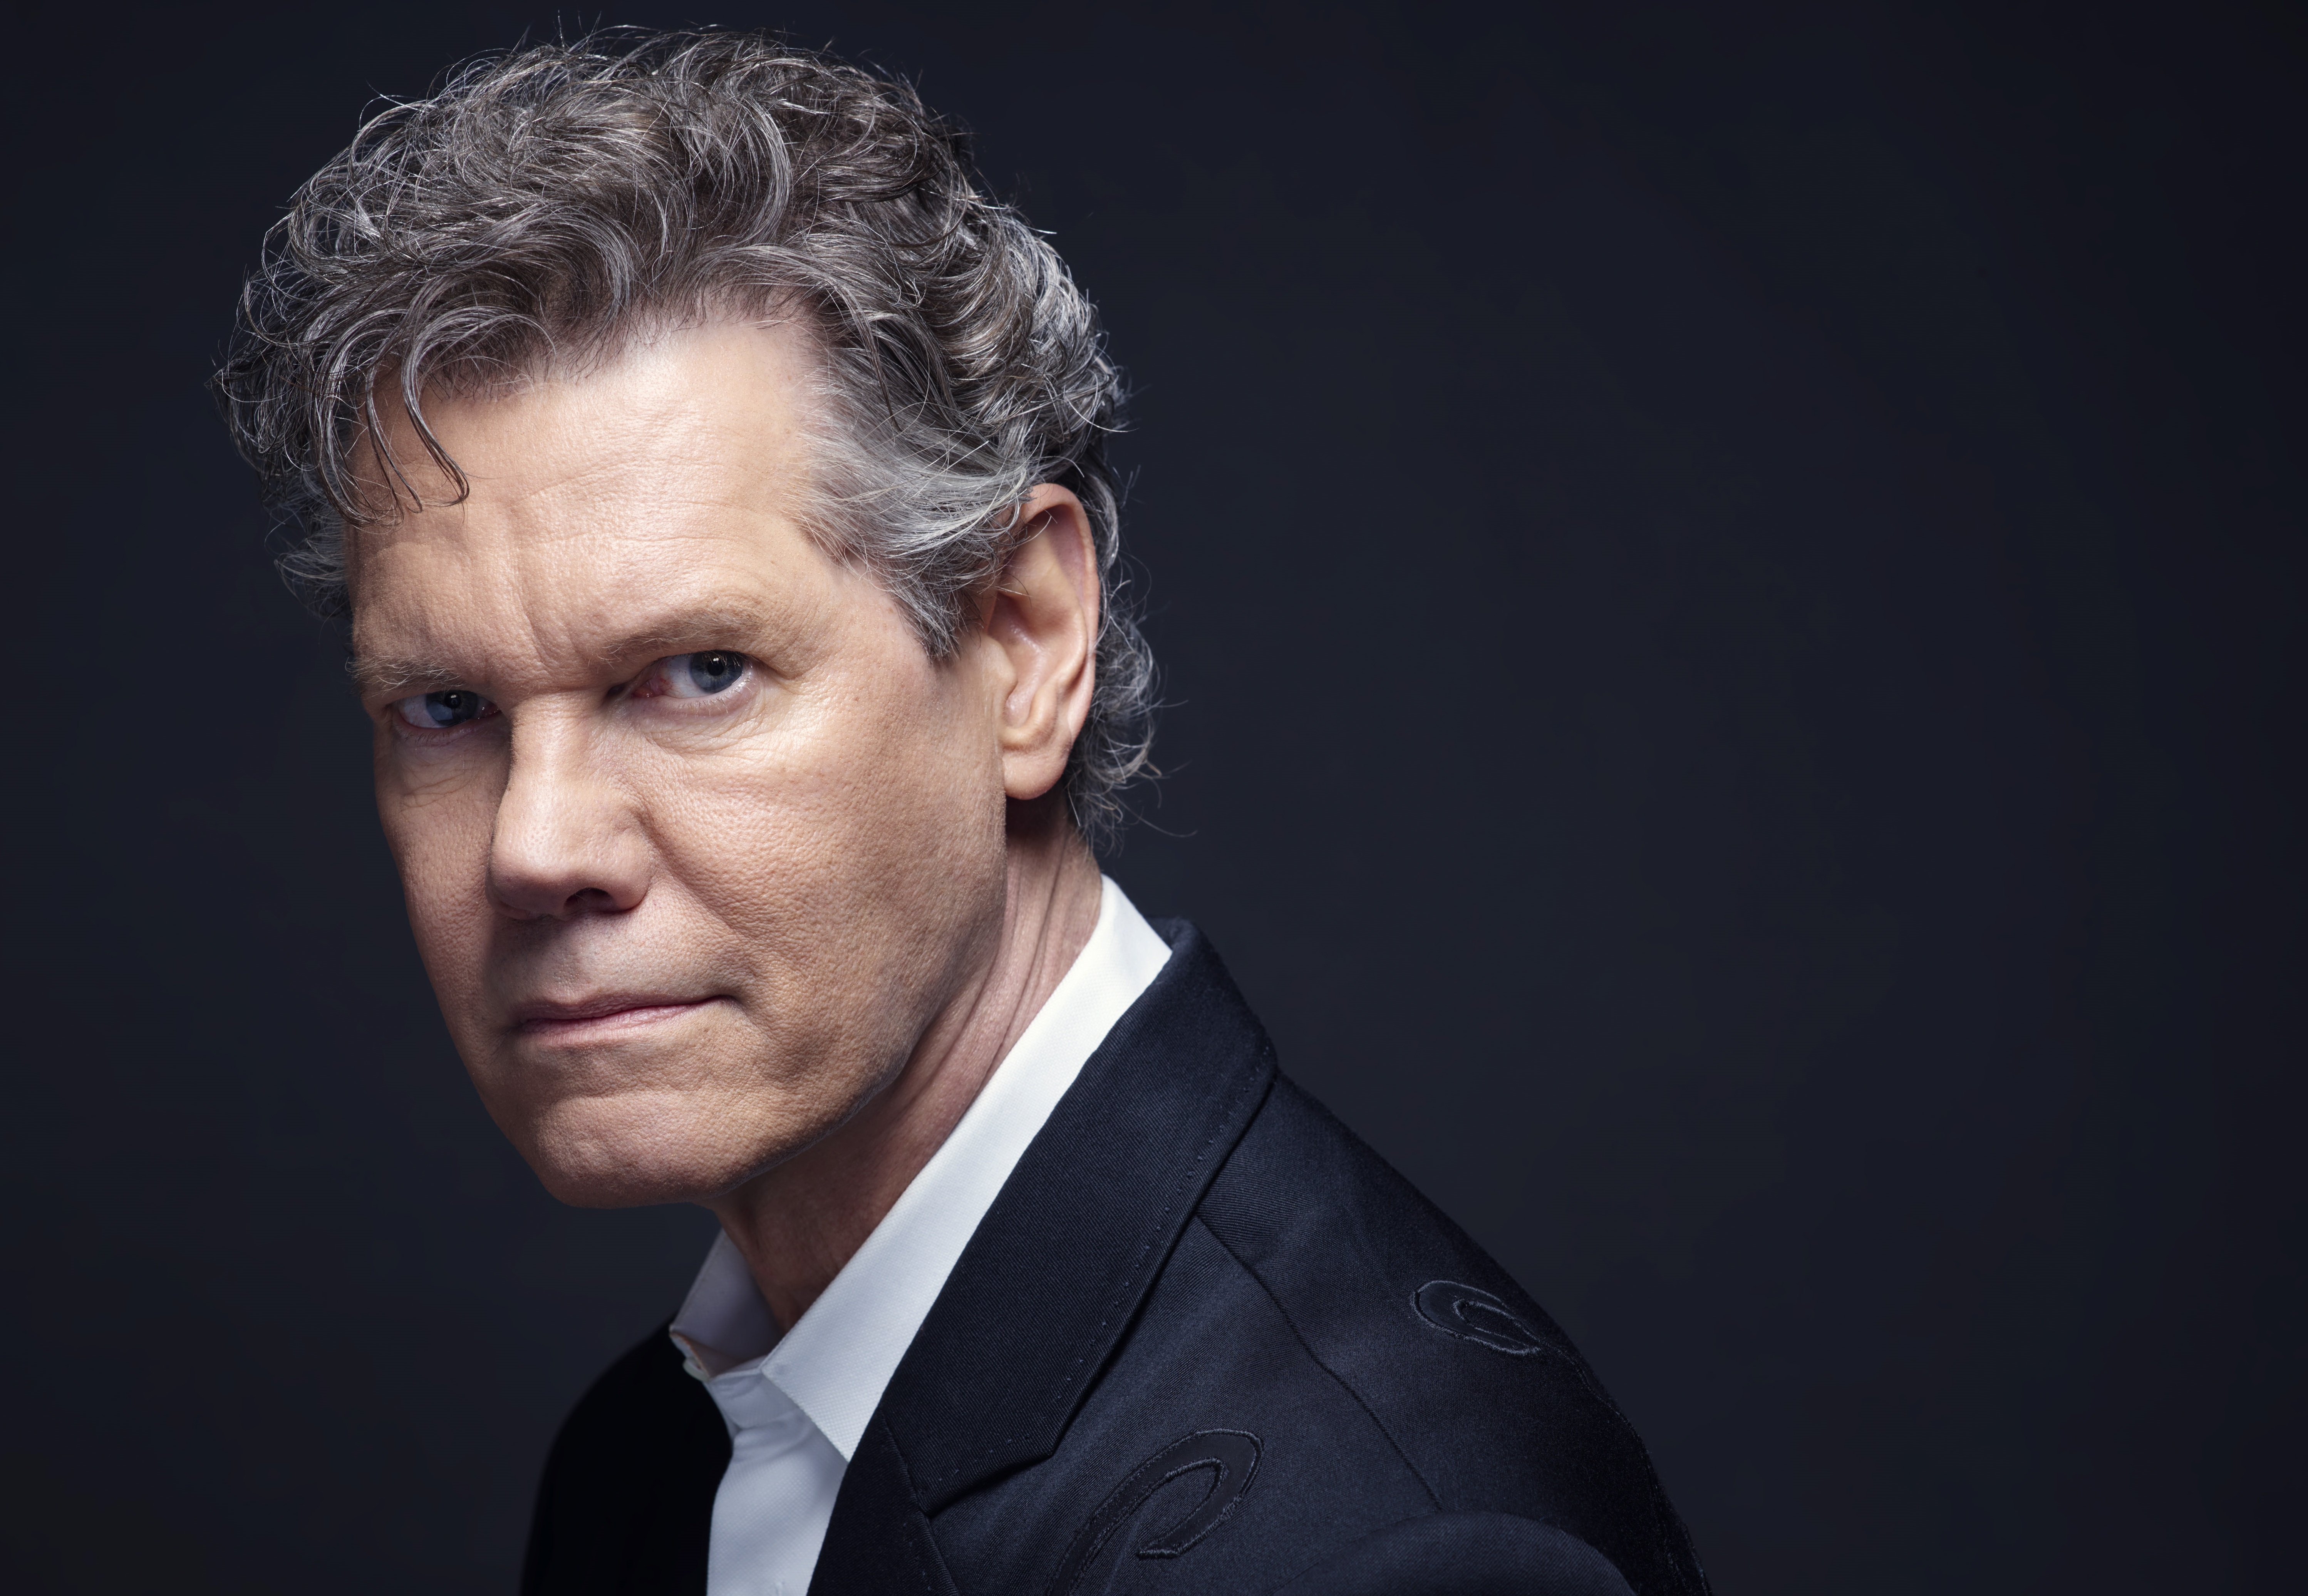 Randy Travis Hand Selects Brand New ‘Diggin’ Up Songs’ Spotify Playlist